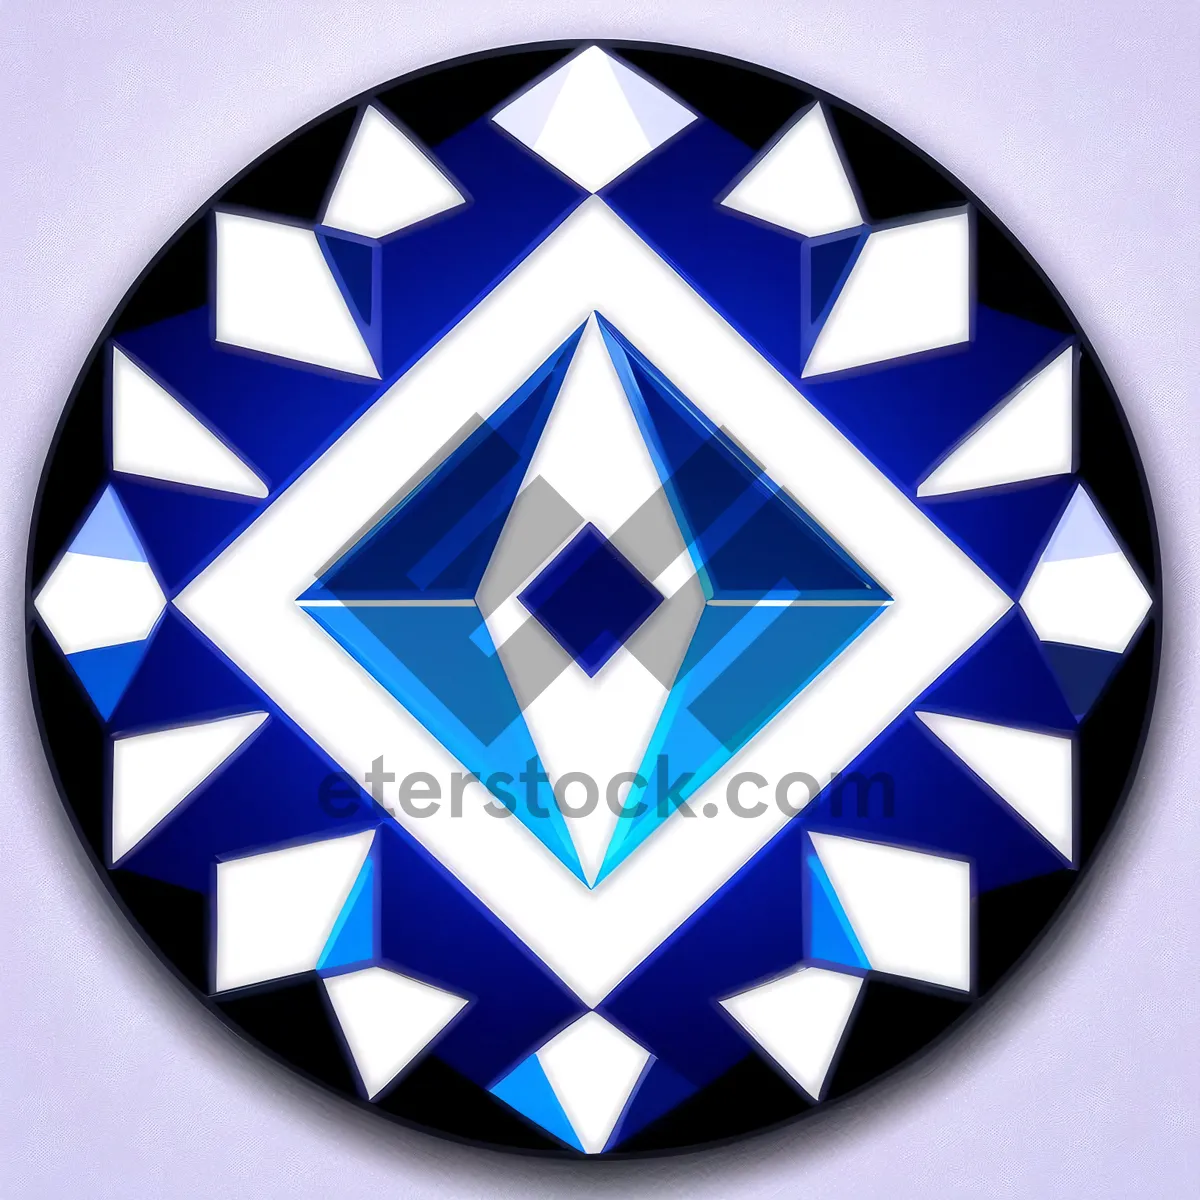 Picture of Shielded Gem: Symbolic Armor Design for Protection